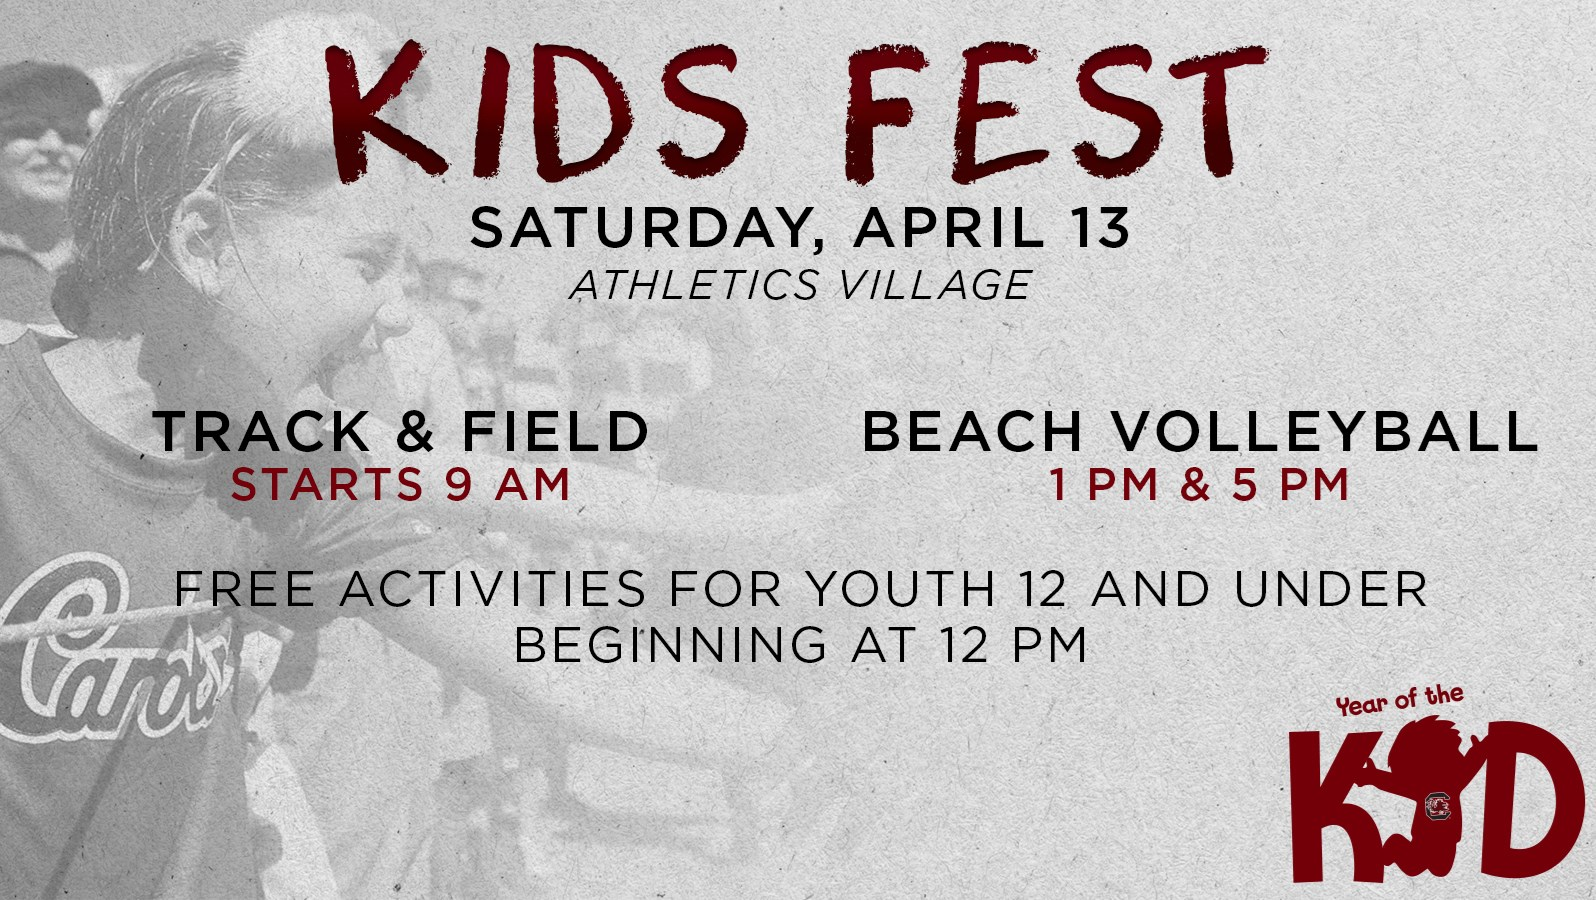 Kids Fest Highlights Promotional Events this Weekend